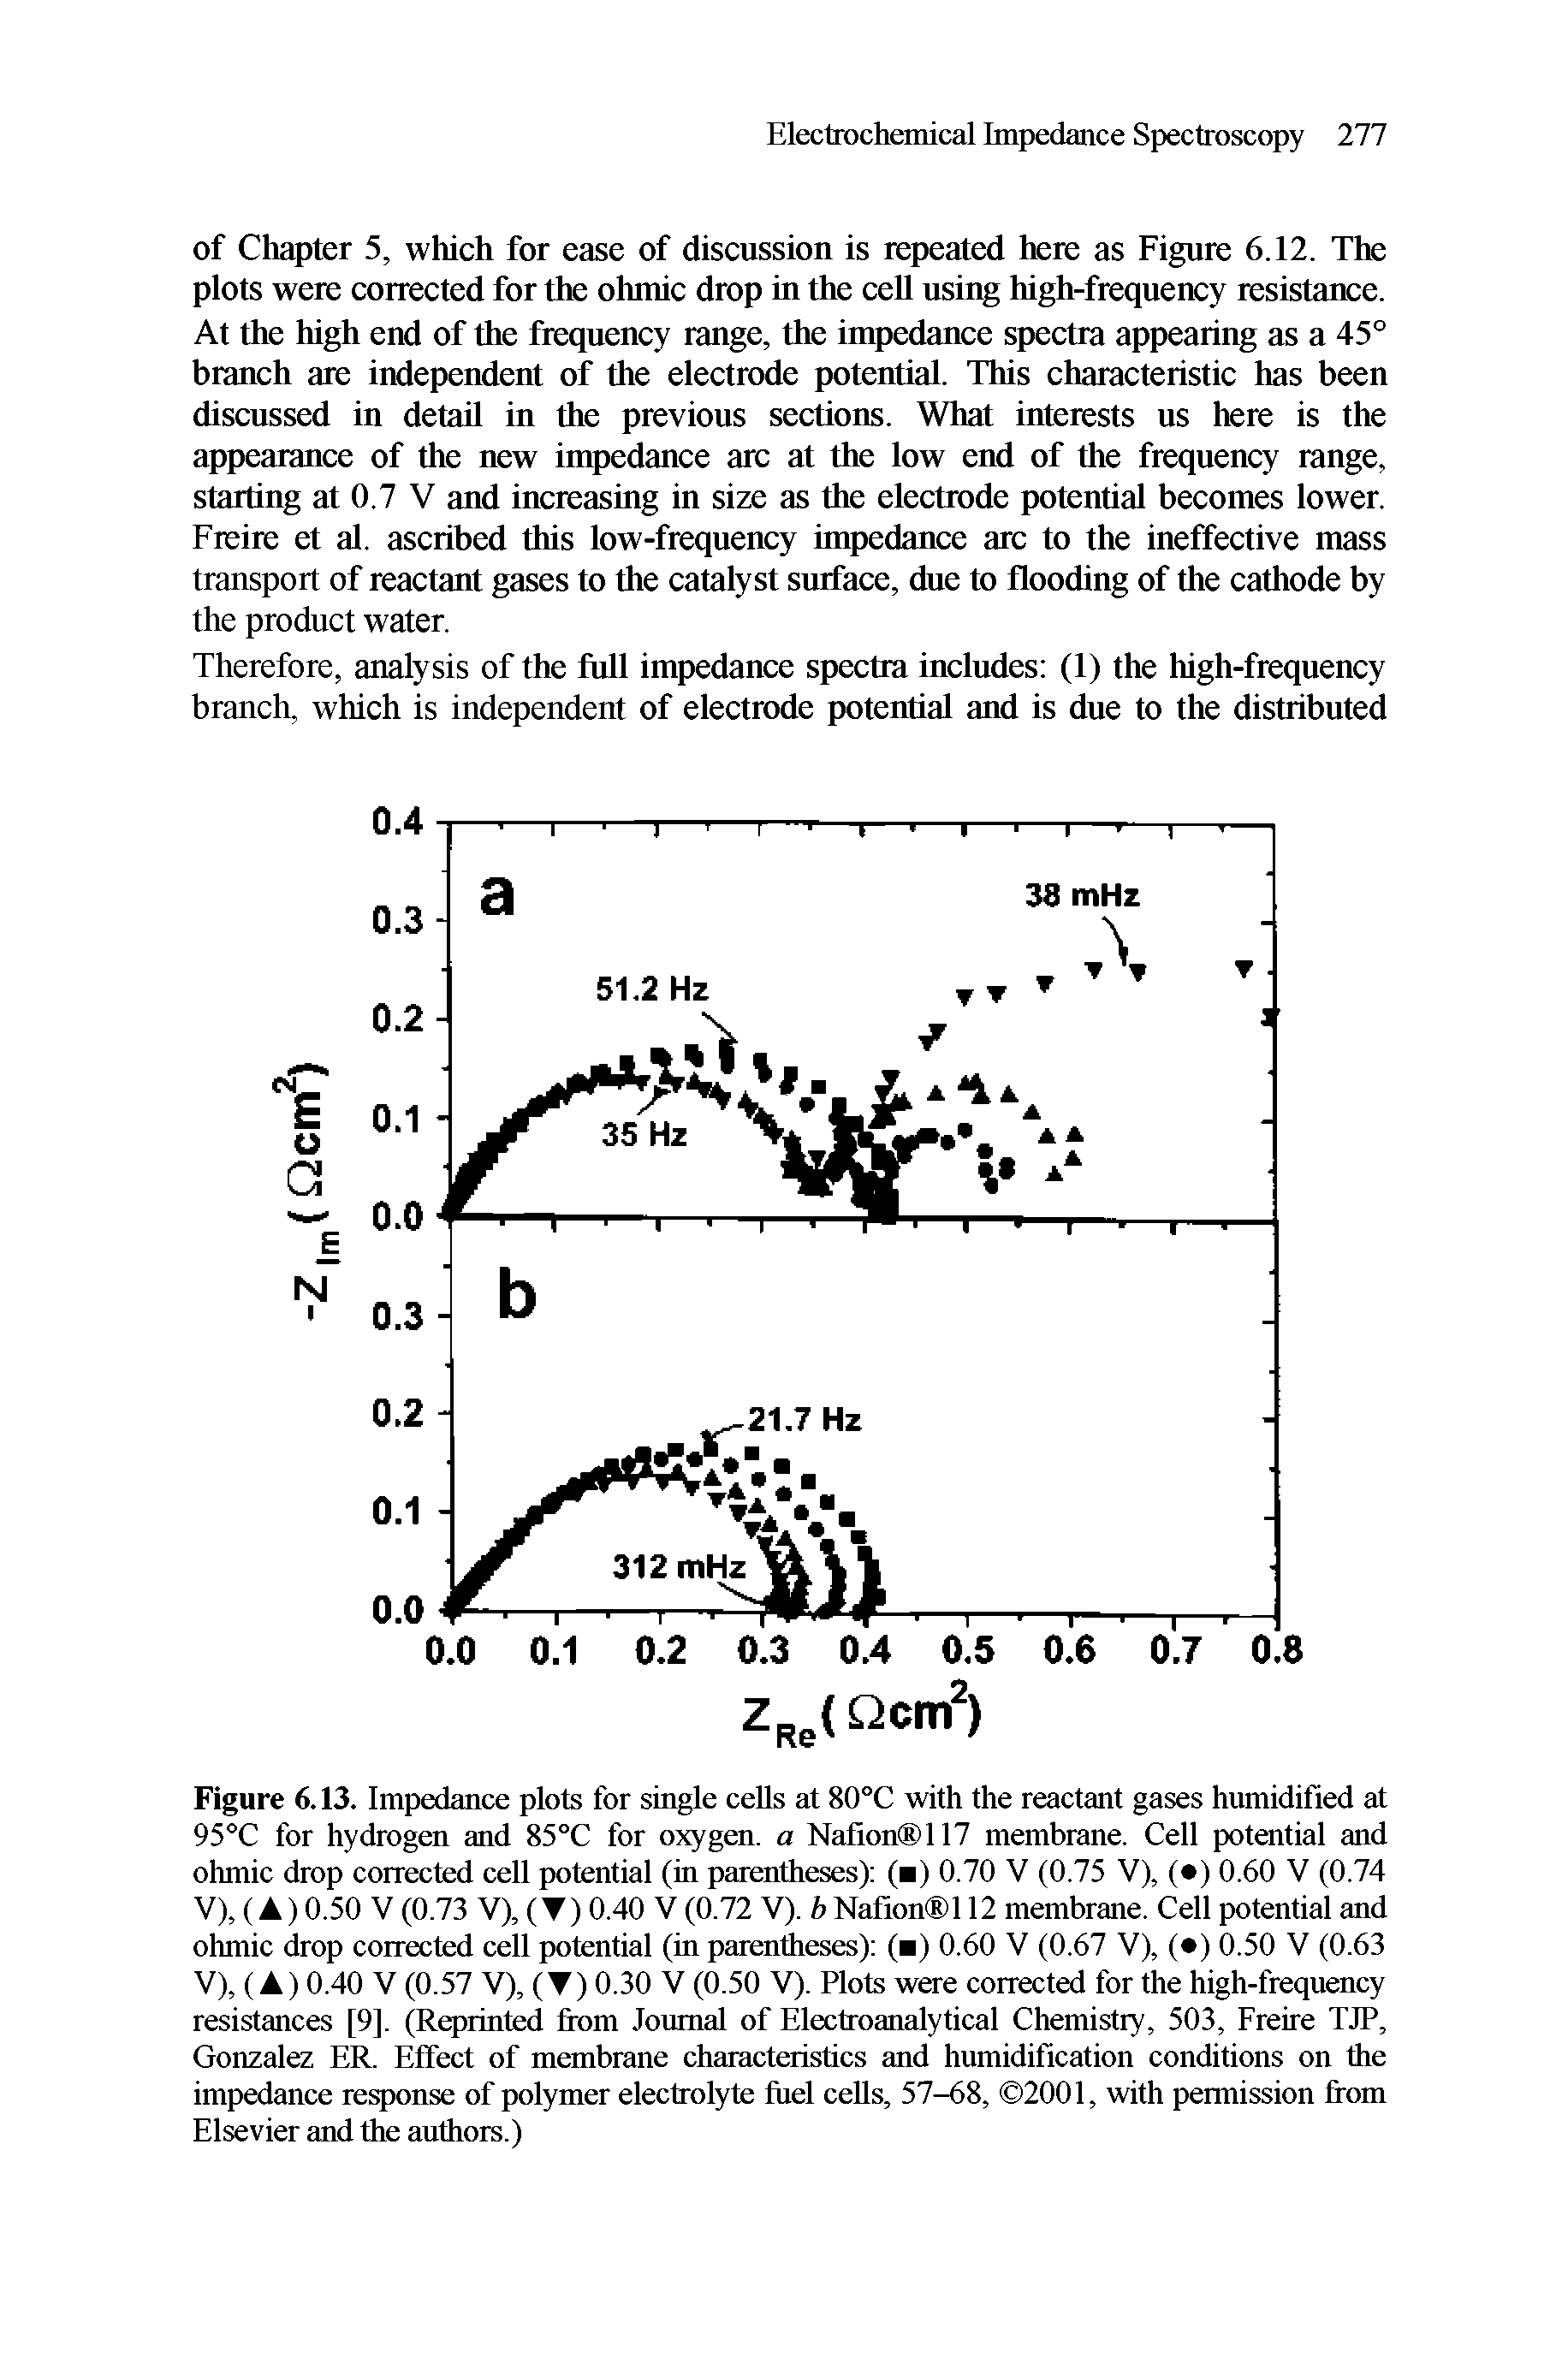 Figure 6.13. Impedance plots for single cells at 80°C with the reactant gases humidified at 95°C for hydrogen and 85°C for oxygen, a Nafion 117 membrane. Cell potential and ohmic drop corrected cell potential (in parentheses) ( ) 0.70 V (0.75 V), ( ) 0.60 V (0.74 V), ( ) 0.50 V (0.73 V), (T) 0.40 V (0.72 V). b Nafion l 12 membrane. Cell potential and ohmic drop corrected cell potential (in parentheses) ( ) 0.60 V (0.67 V), ( ) 0.50 V (0.63 V), (A) 0.40 V (0.57 V), (T) 0.30 V (0.50 V). Plots were corrected for the high-frequency resistances [9], (Reprinted from Journal of Electroanalytical Chemistry, 503, Freire TJP, Gonzalez ER. Effect of membrane characteristics and humidification conditions on the impedance response of polymer electrolyte fuel cells, 57-68, 2001, with permission from Elsevier and the authors.)...